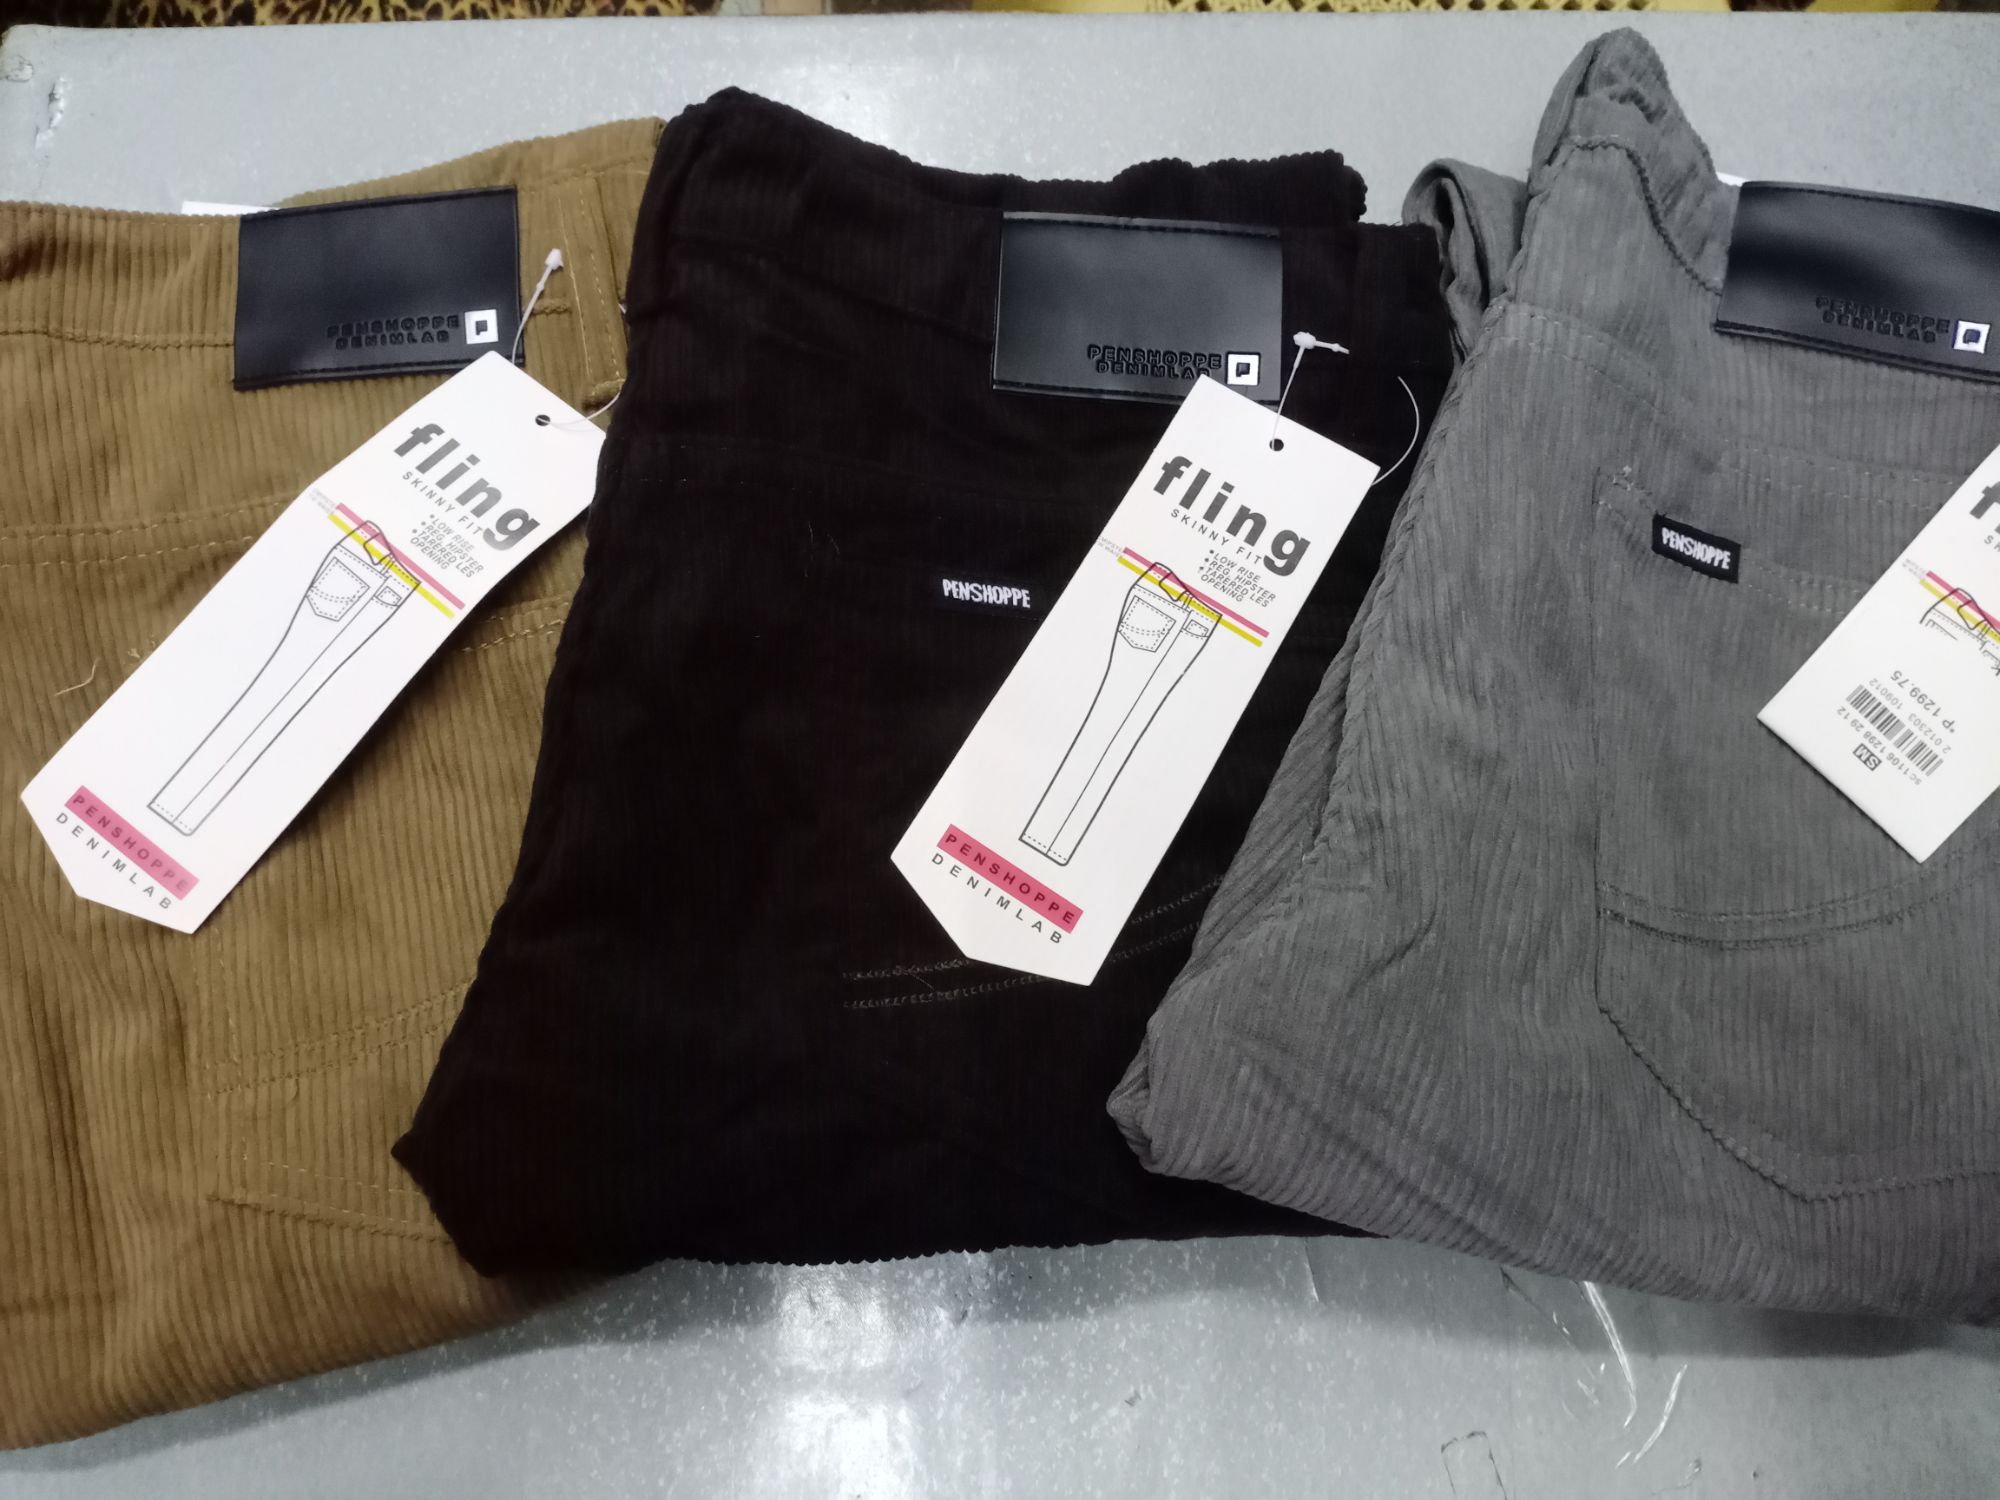 Buy Olive Trousers & Pants for Men by NETPLAY Online | Ajio.com